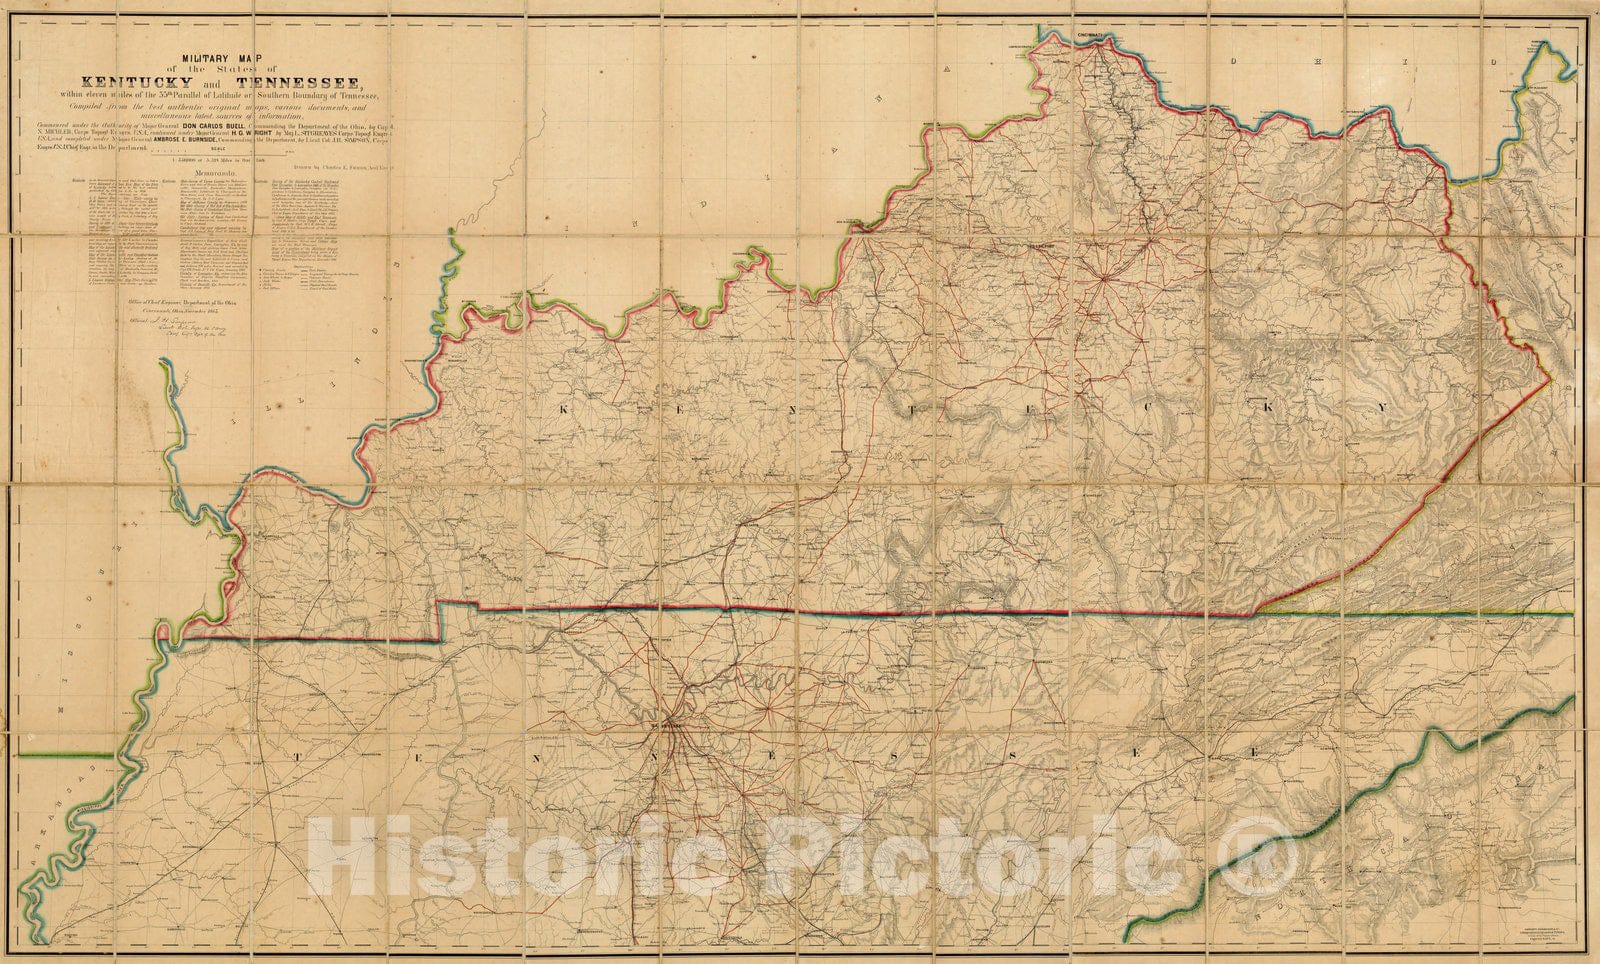 Historic Map : Military Map of the States of Kentucky and Tennessee, 1863 - Vintage Wall Art